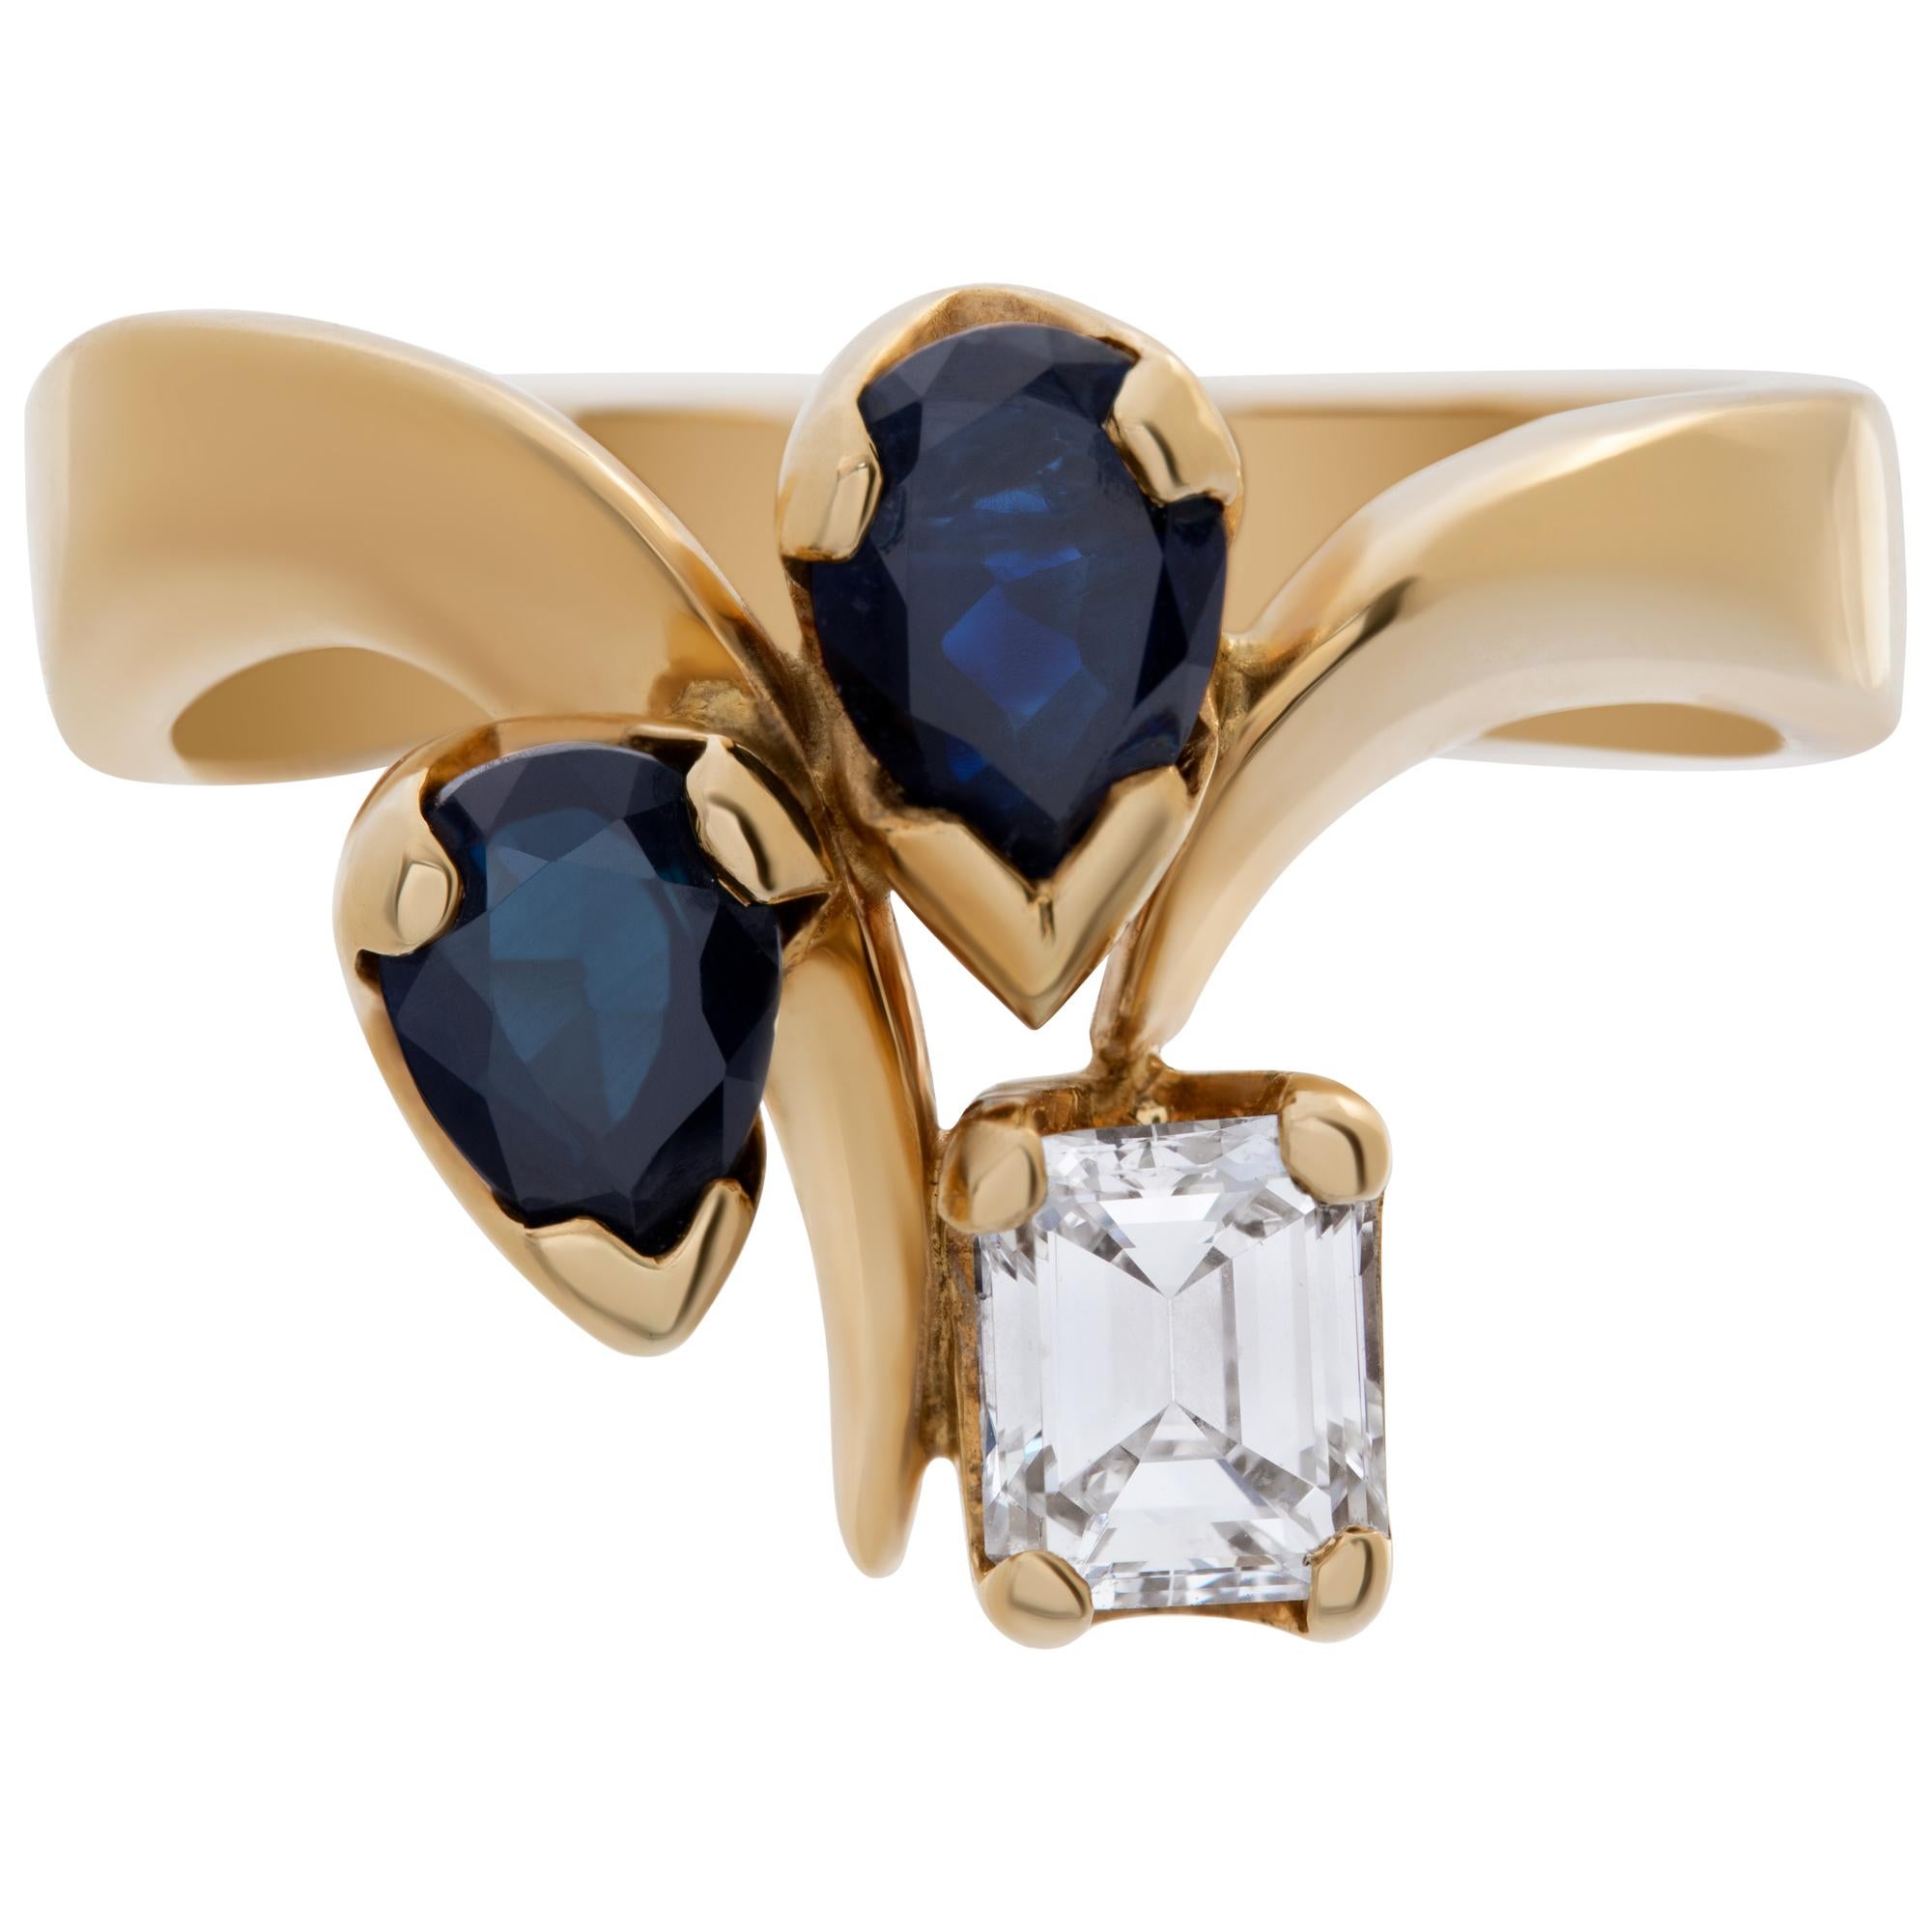 Pretty diamond & sapphire ring in 14k yellow gold. Size 7.25.This Sapphire ring is currently size 7.25 and some items can be sized up or down, please ask! It weighs 4.6 pennyweights and is 14k.
